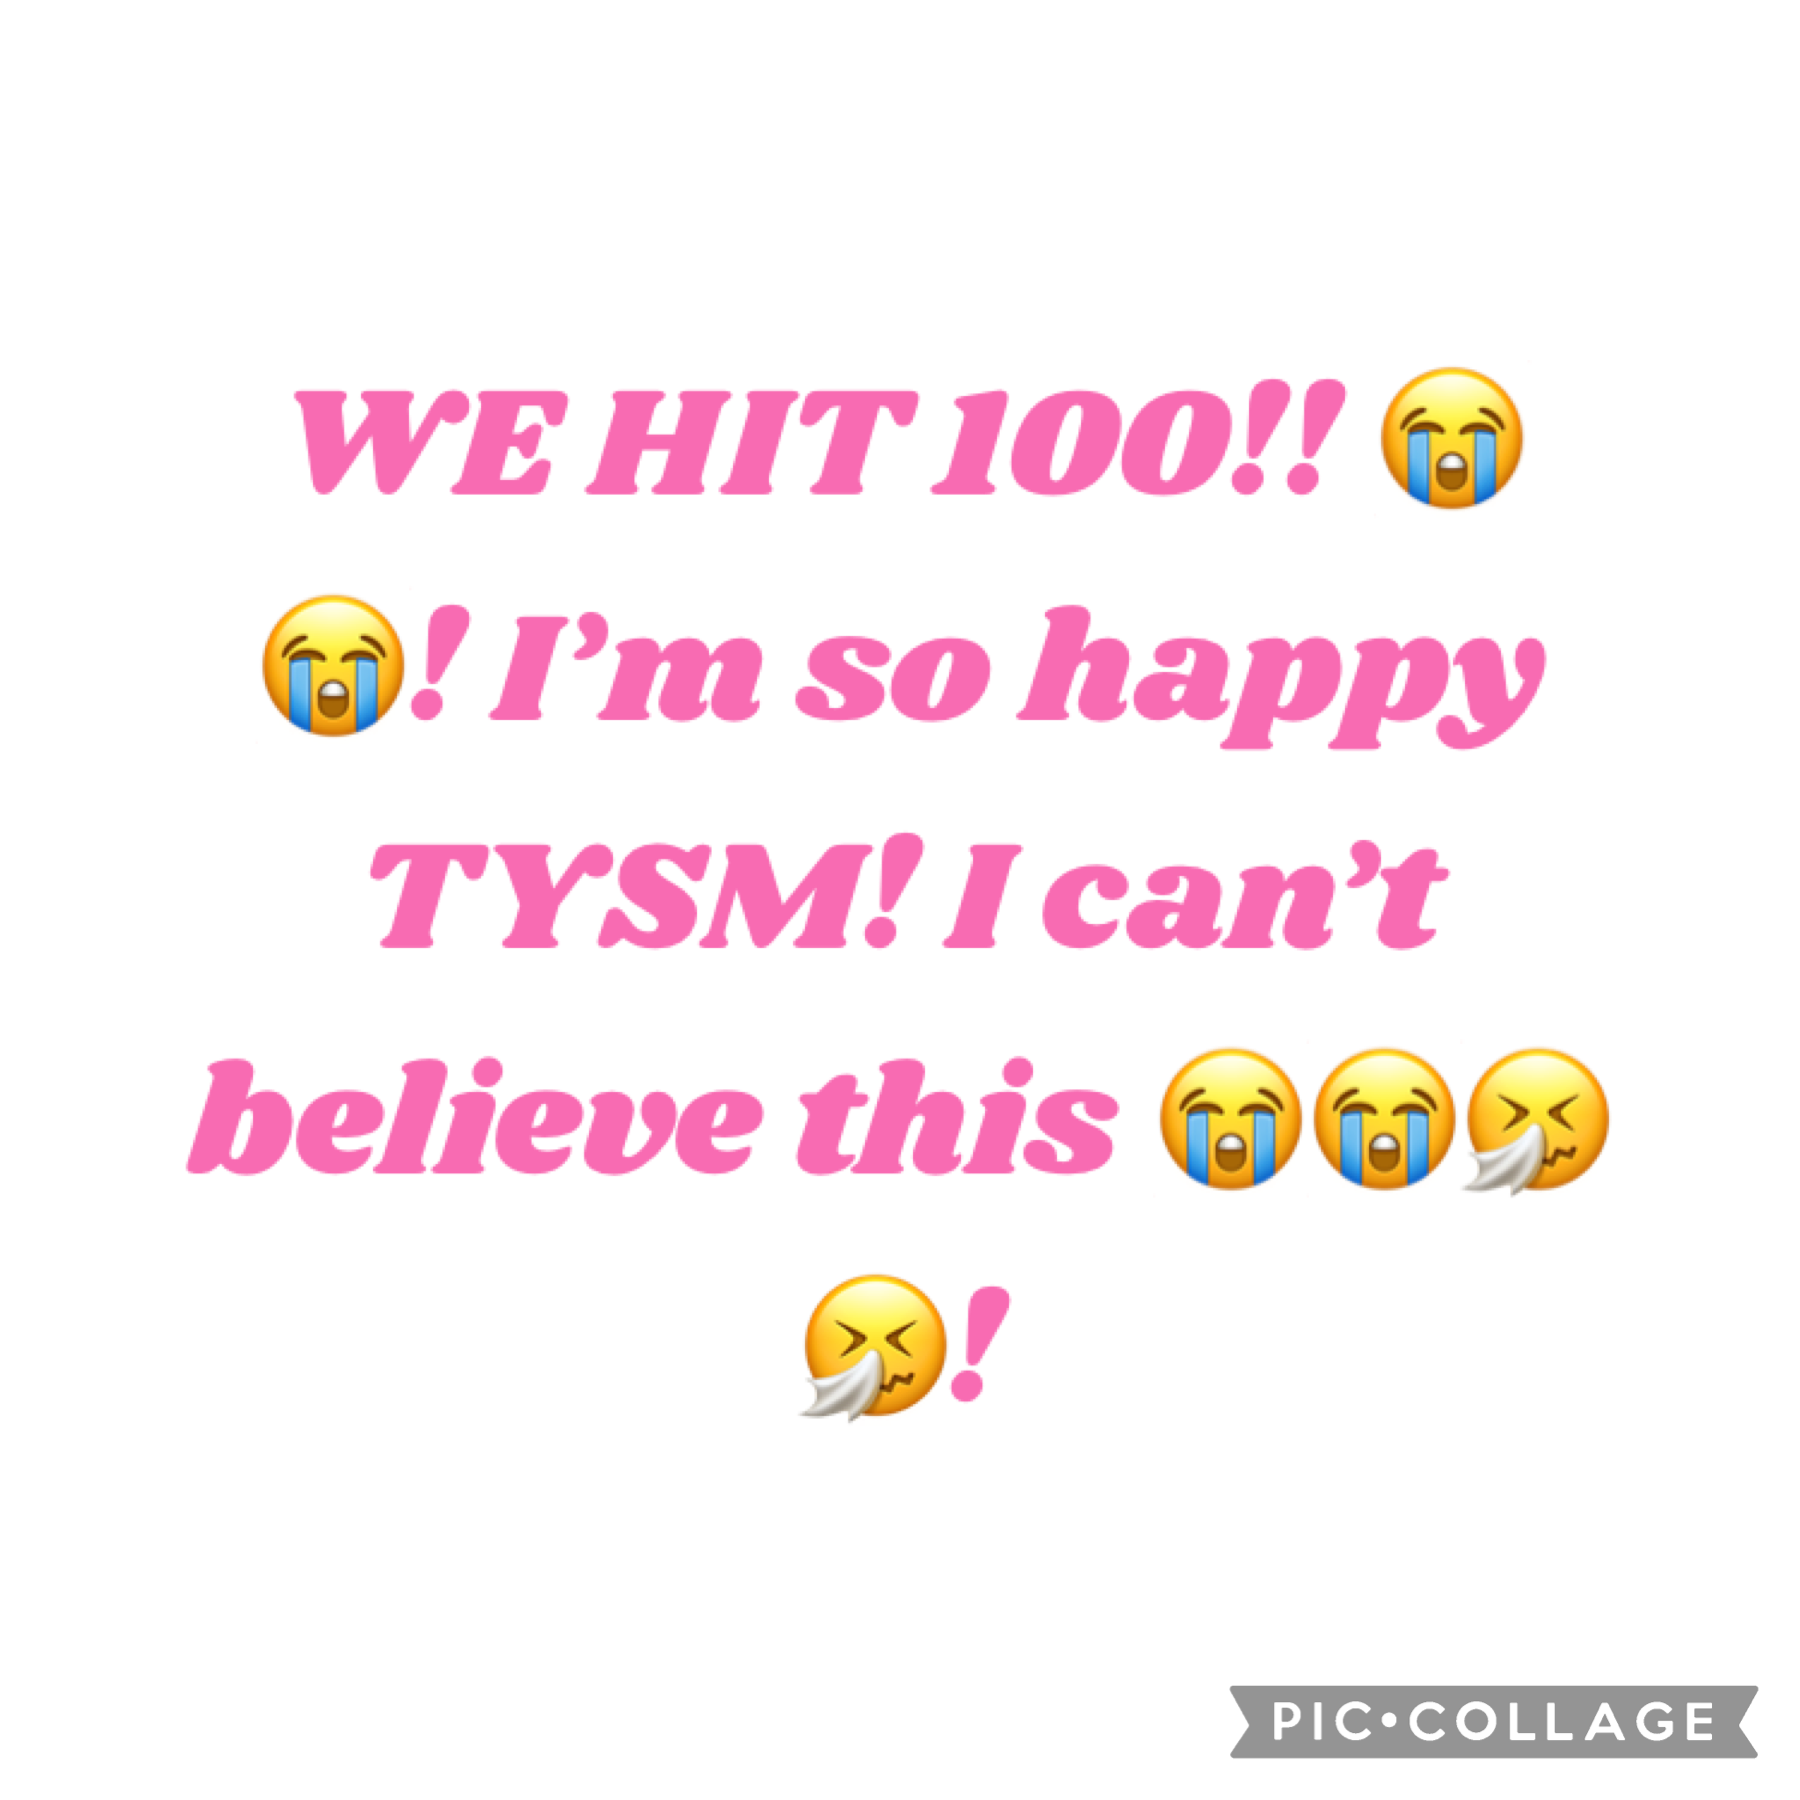 🥳Tap!🥳
Guys… it’s official. WE HIT 100! 
I can’t believe this is possible, thank you to everyone that’s followed it means so much to me! TYSM!! I’m so grateful! 🤧
Stay positive xoxo, 
Pink-Petals